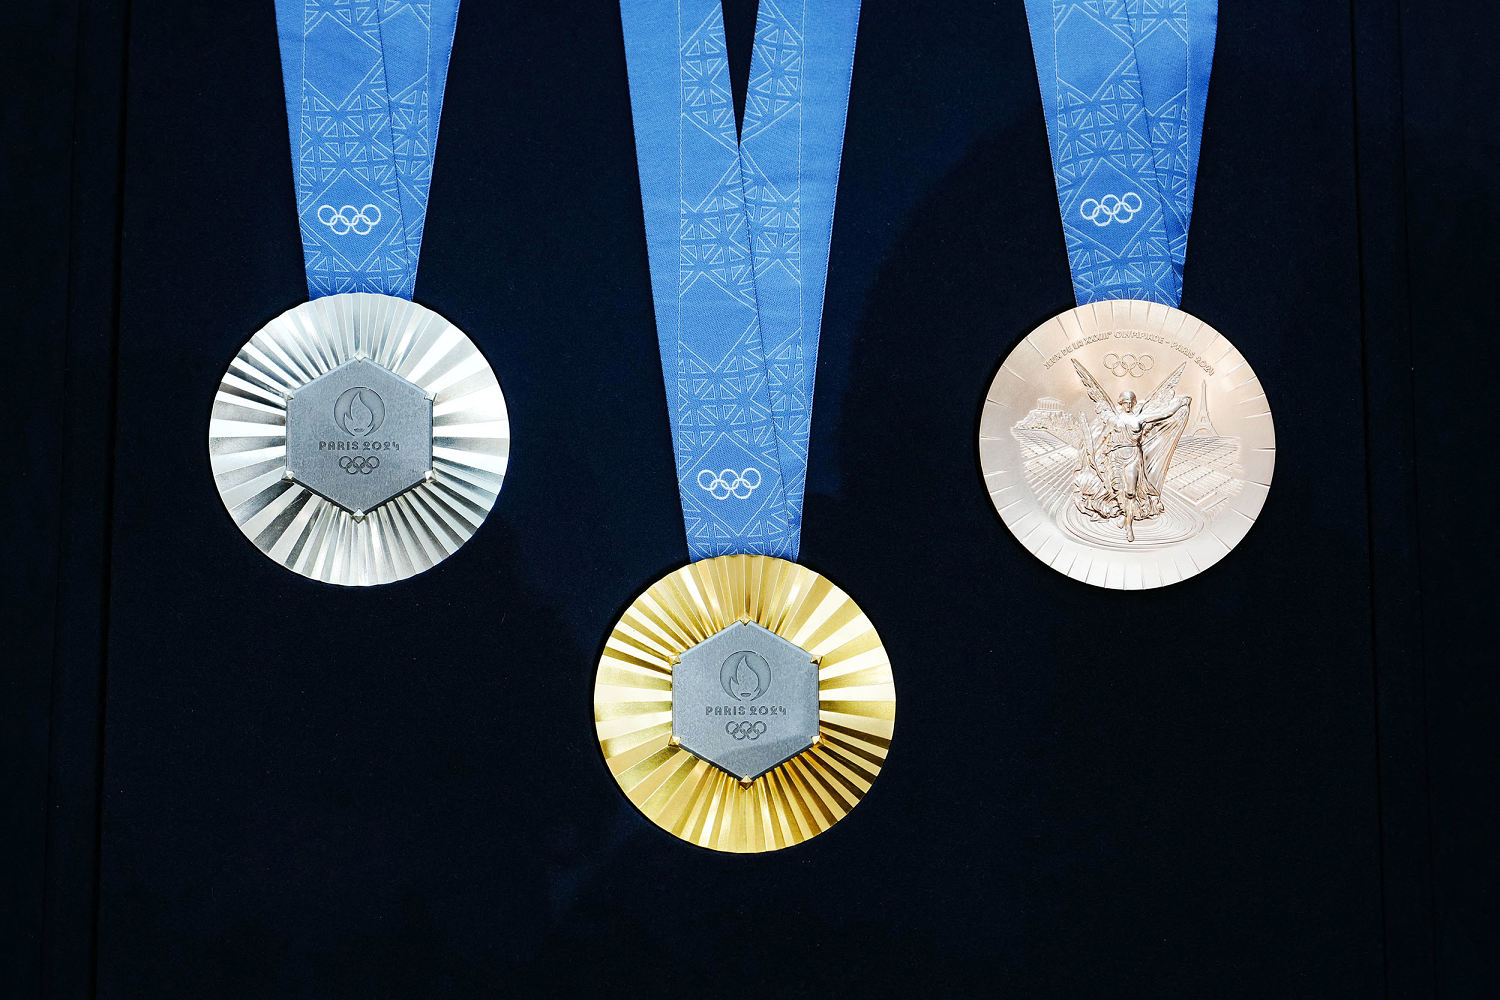 The Paris Olympics medals are monumental: They're embedded with pieces of the Eiffel Tower